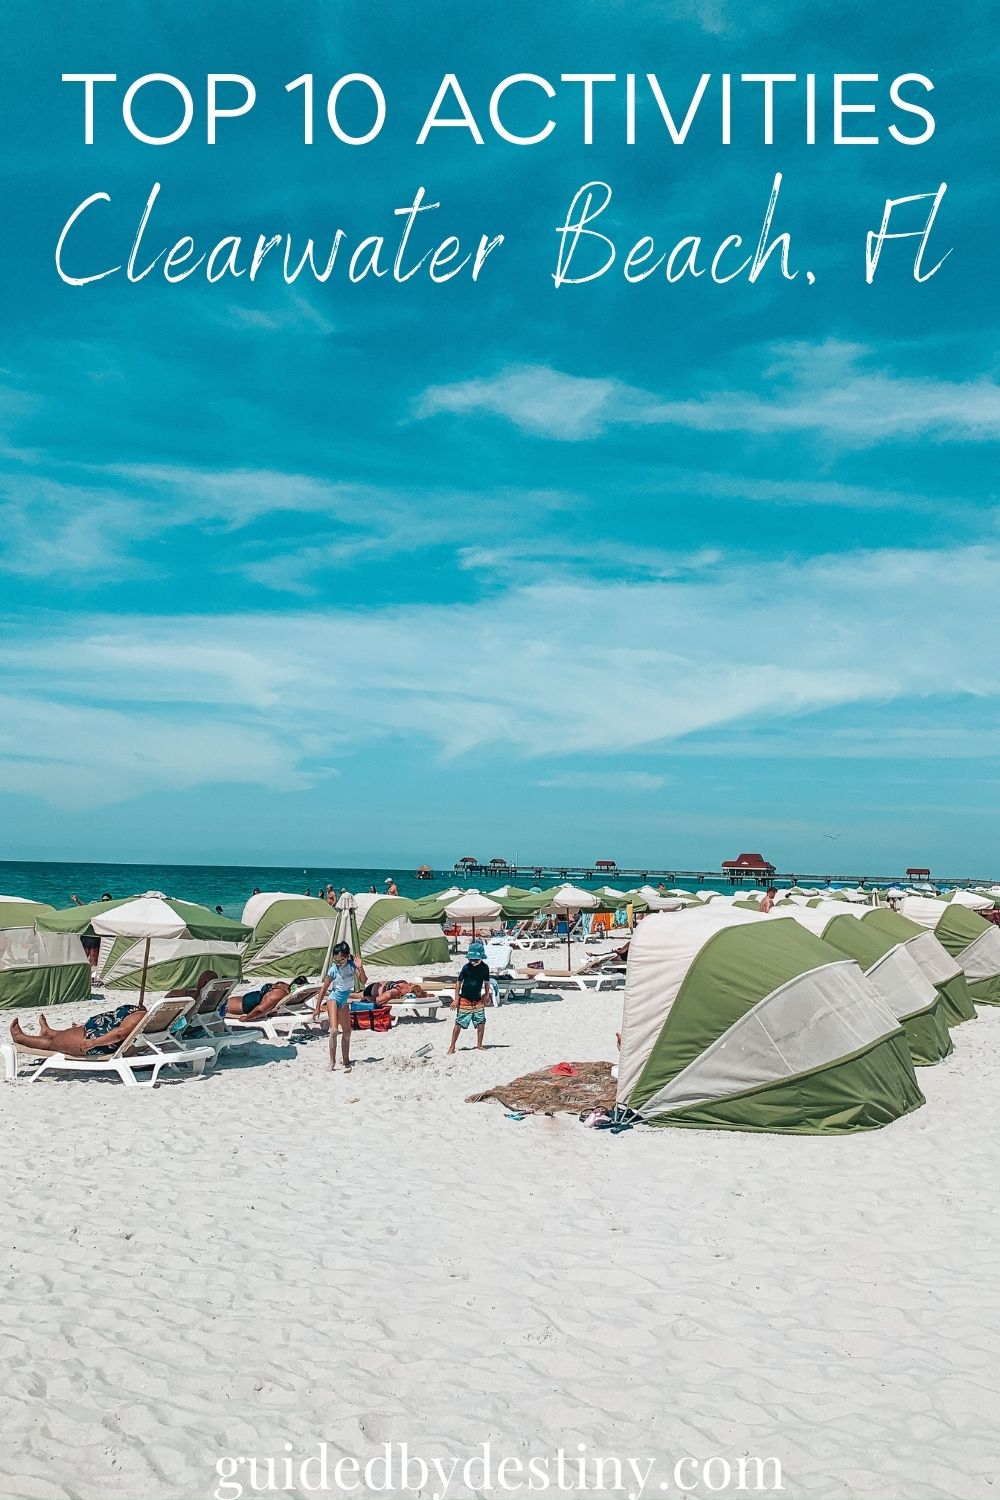 Top things to do Clearwater Beach, Florida